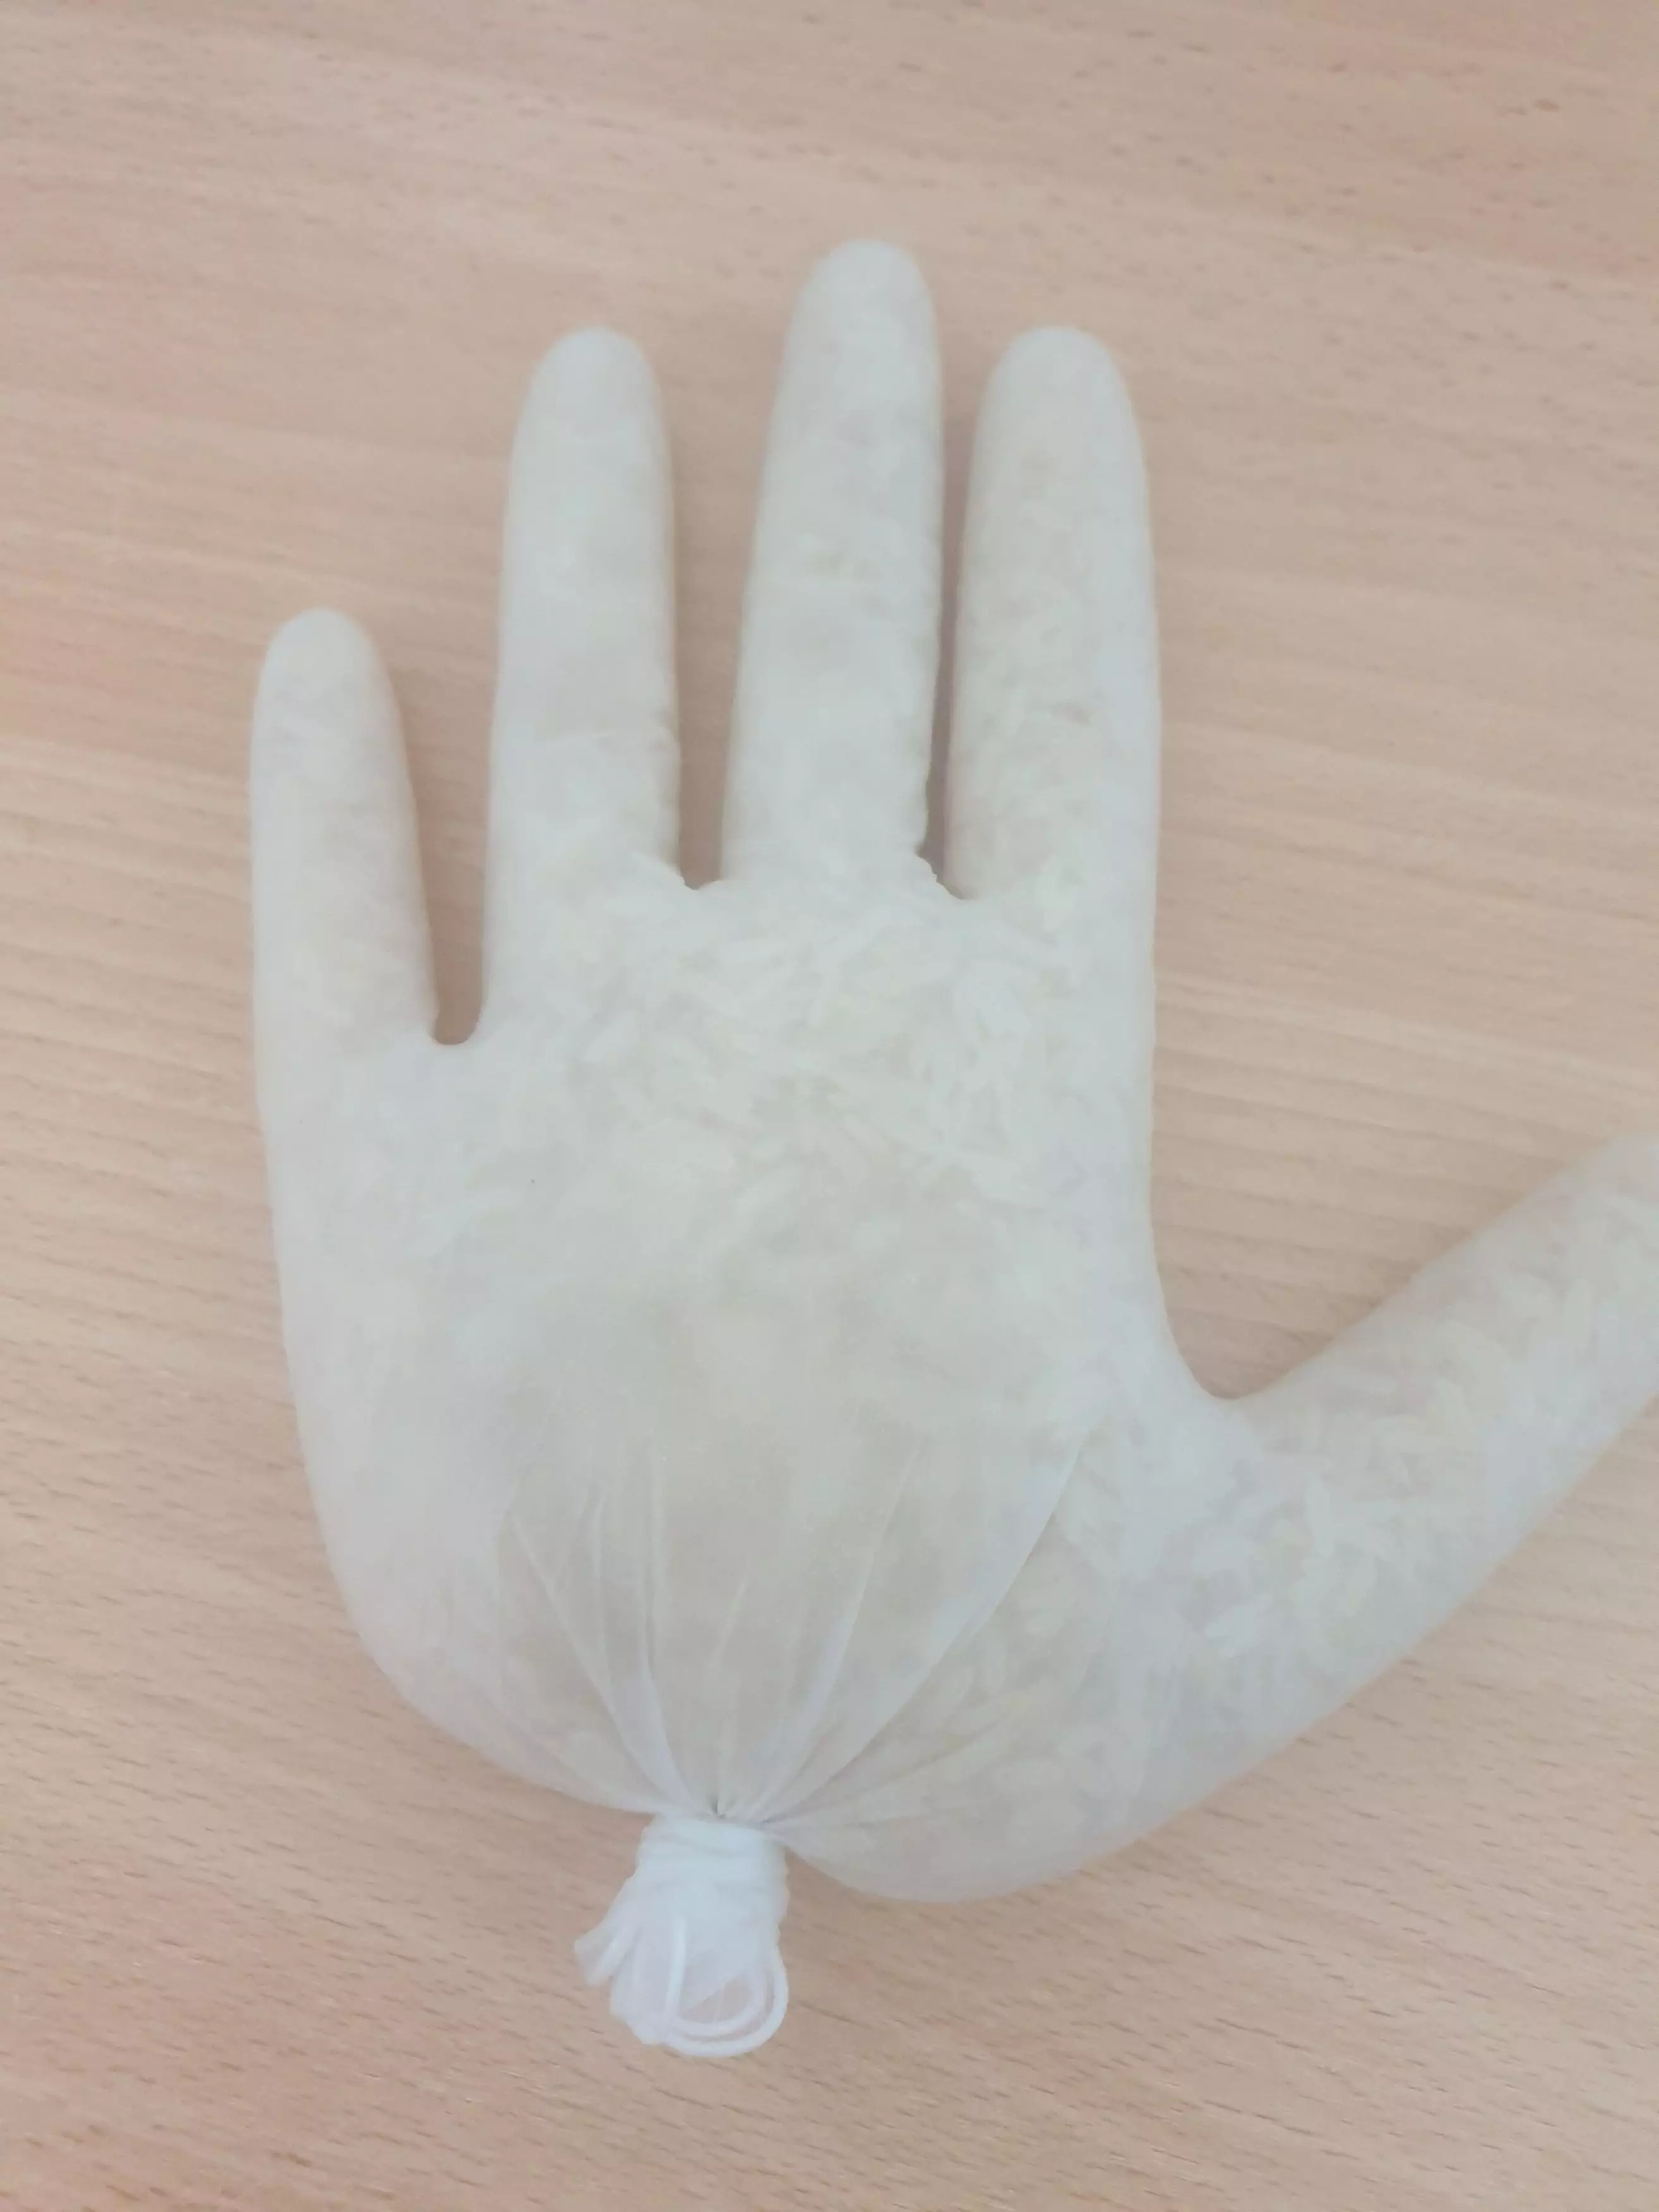 The mum filled a glove with rice (